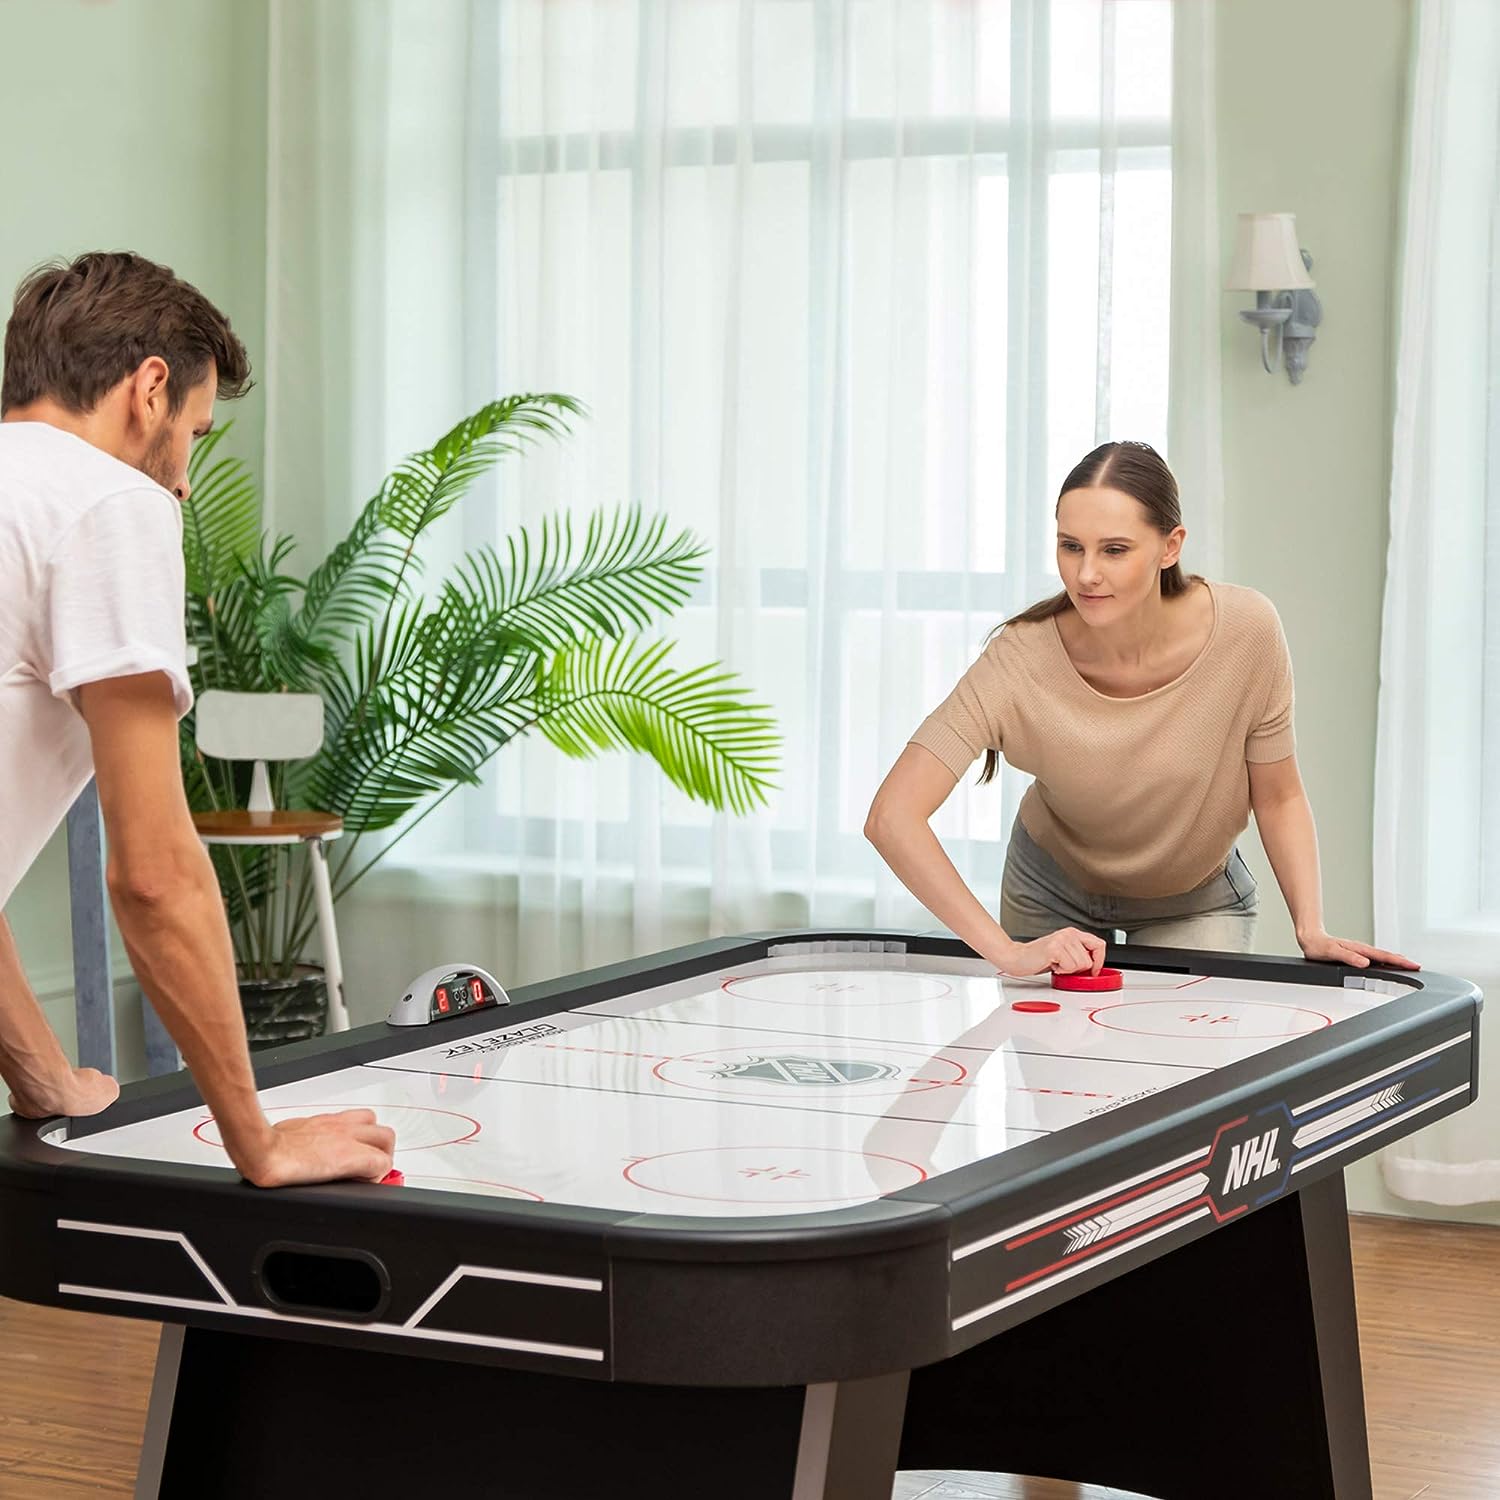 NHL Air Hockey Game Tables by EastPoint Sports - 80" Air Powered Hockey Table - $450